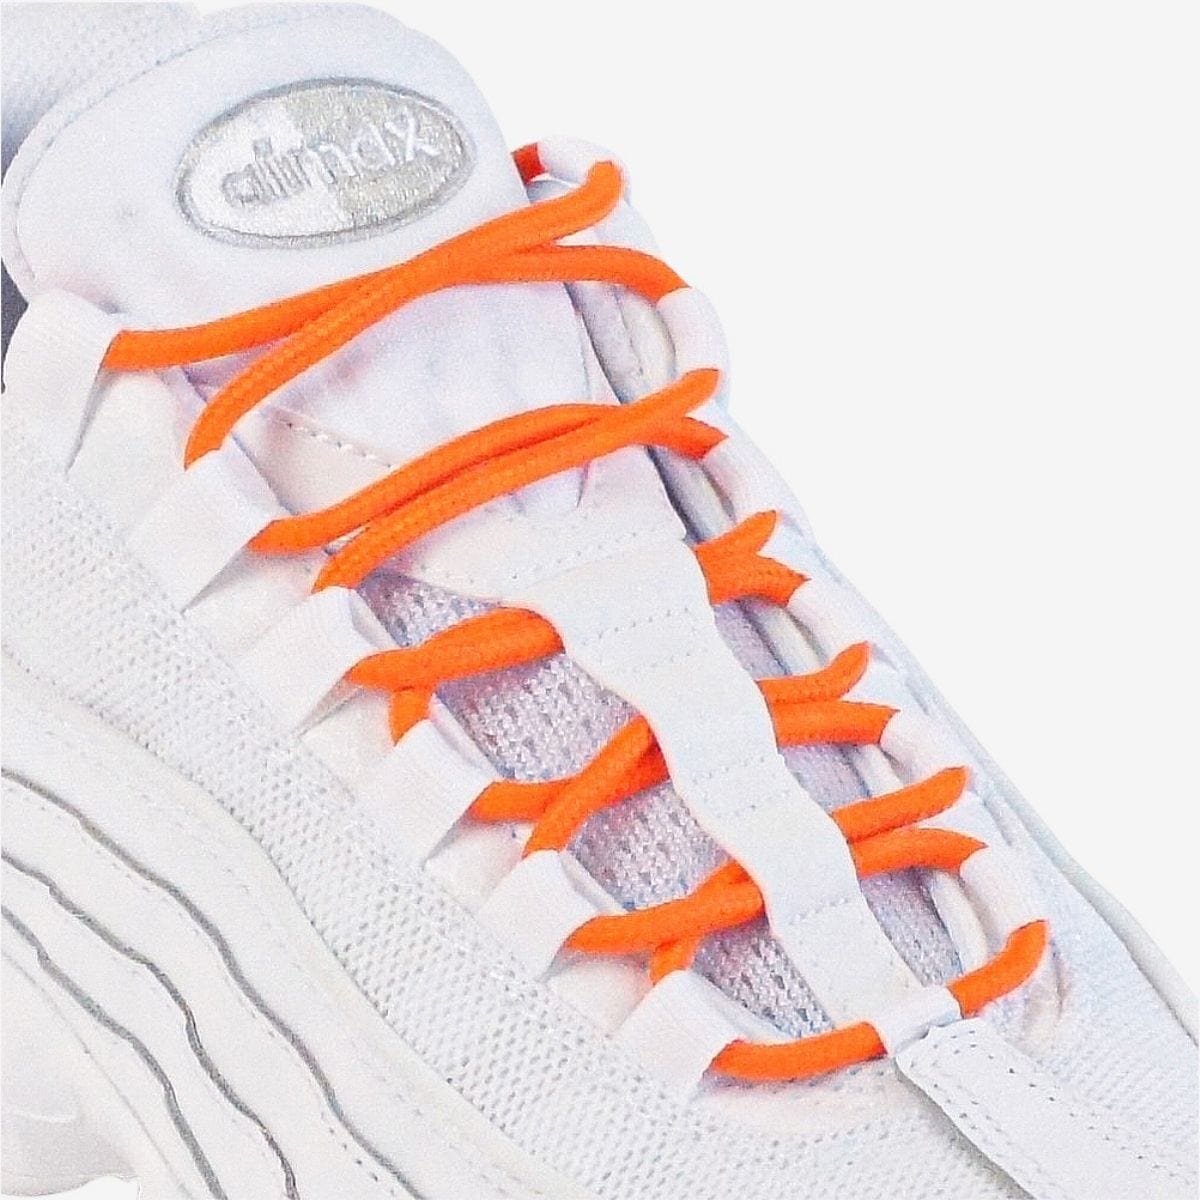 orange-round-rope-shoelaces-for-sneakers-and-running-shoes